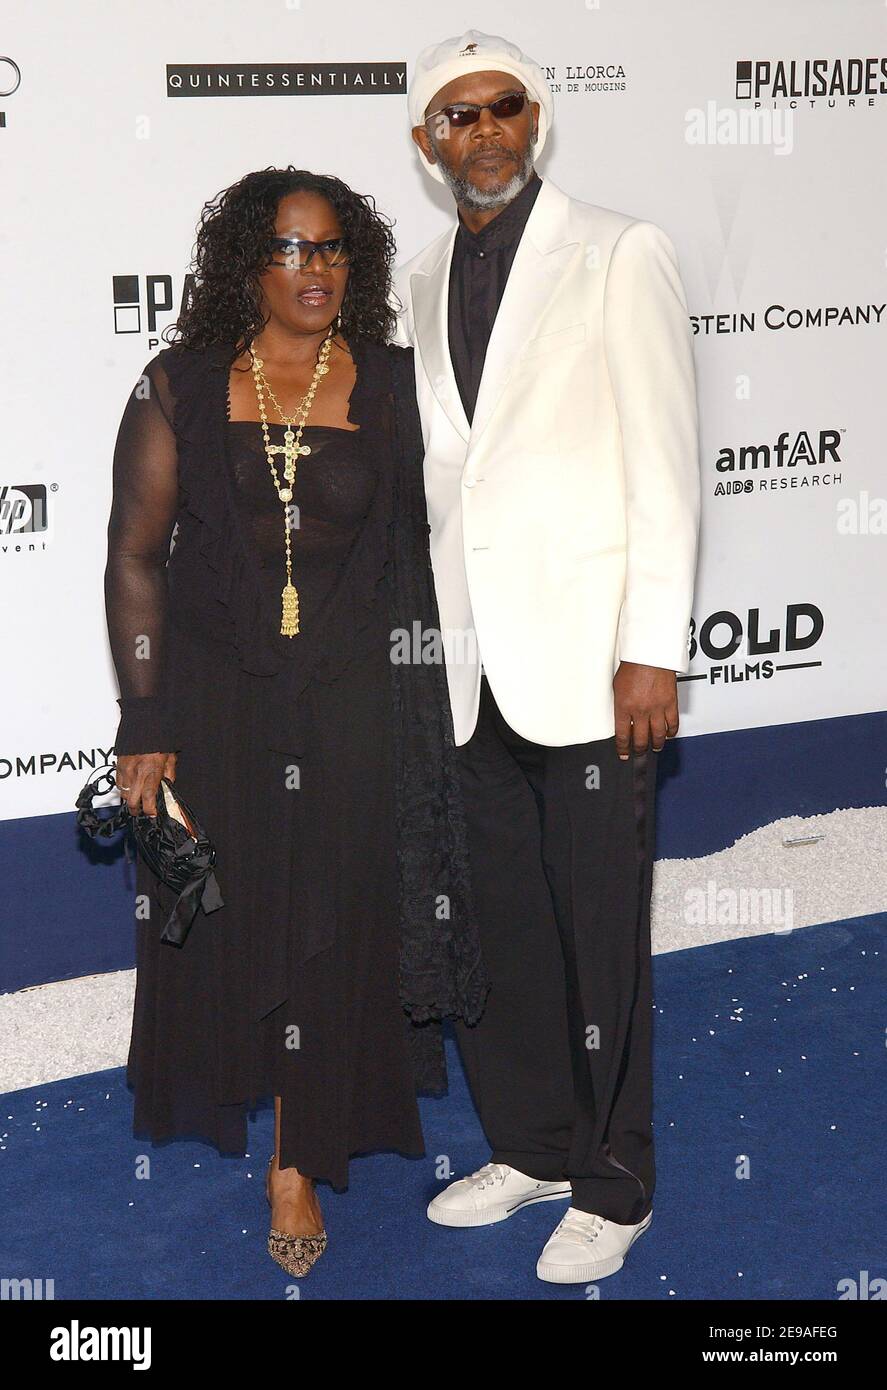 US actor Samuel L. Jackson and wife LaTanya Richardson upon arrival at 'Cinema Against AIDS 2006', the annual event in aid of amfAR (American Foundation for AIDS Research) held during the 59th International Cannes Film Festival at Le Moulin de Mougins, in Mougins, near Cannes, France, on May 25, 2006. Photo by Hahn-Nebinger-Orban/ABACAPRESS.COM Stock Photo